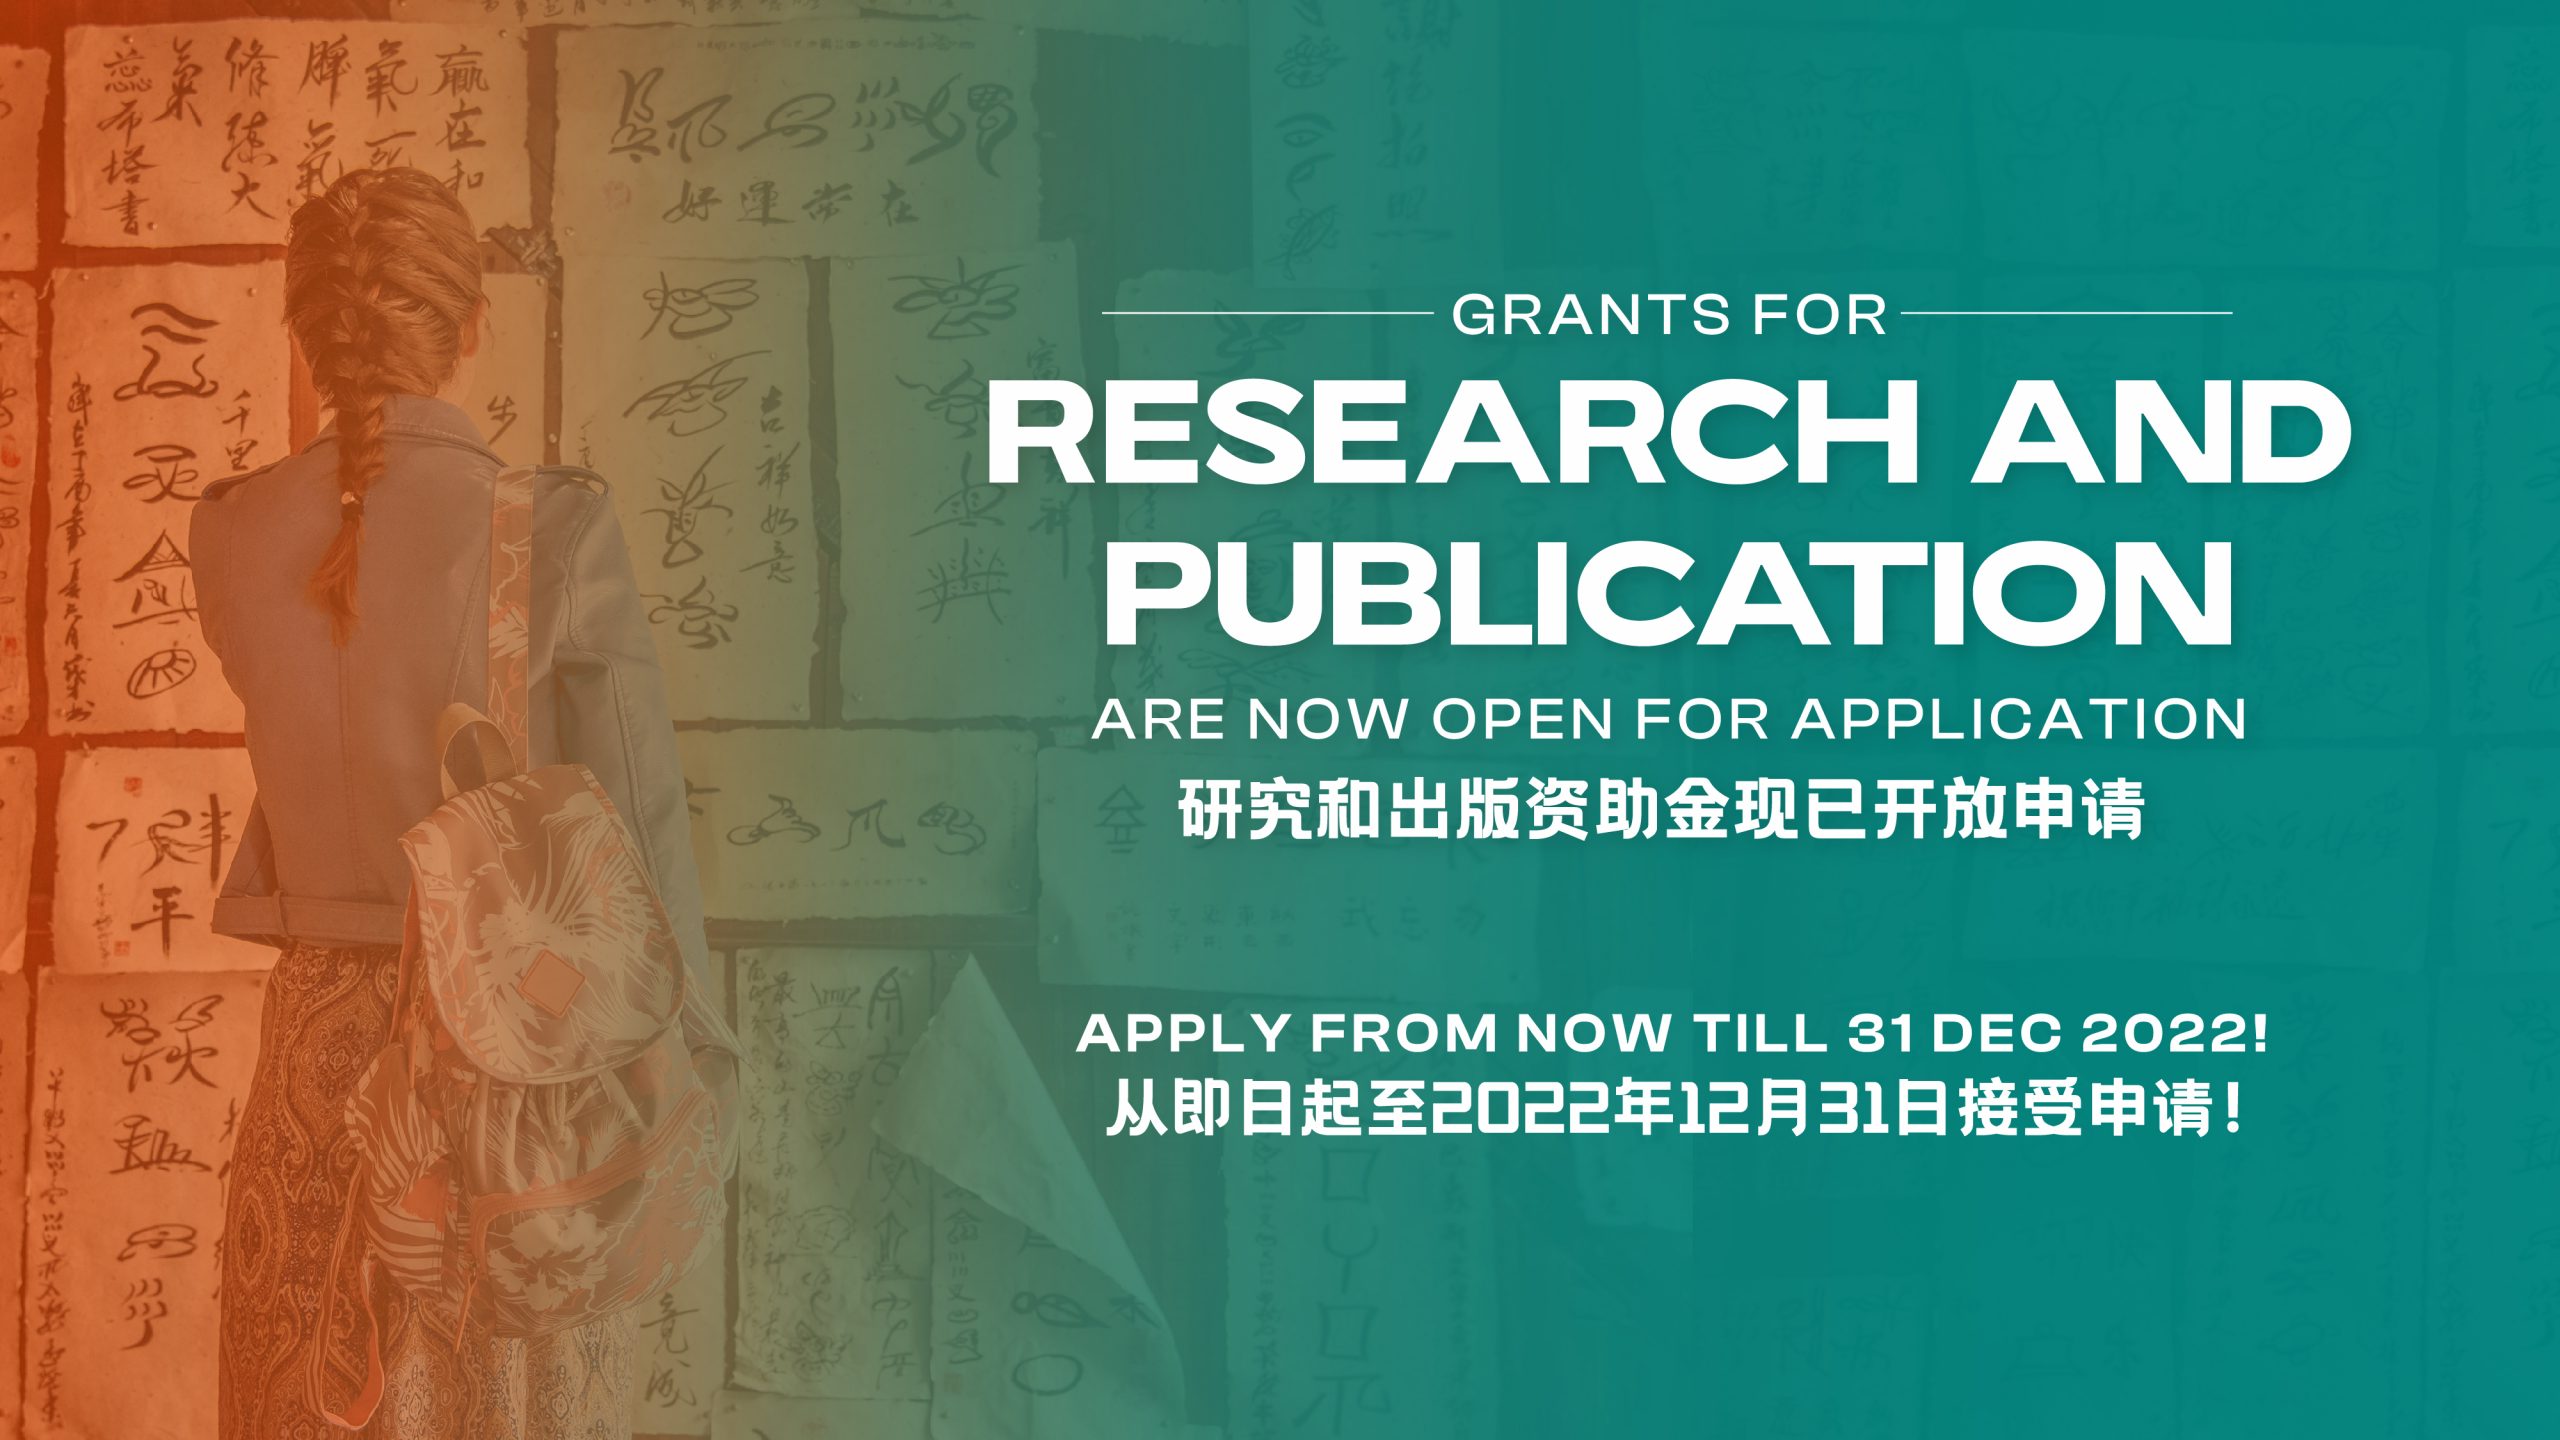 sccc_oct2022_research-and-publication-grants-launch-03